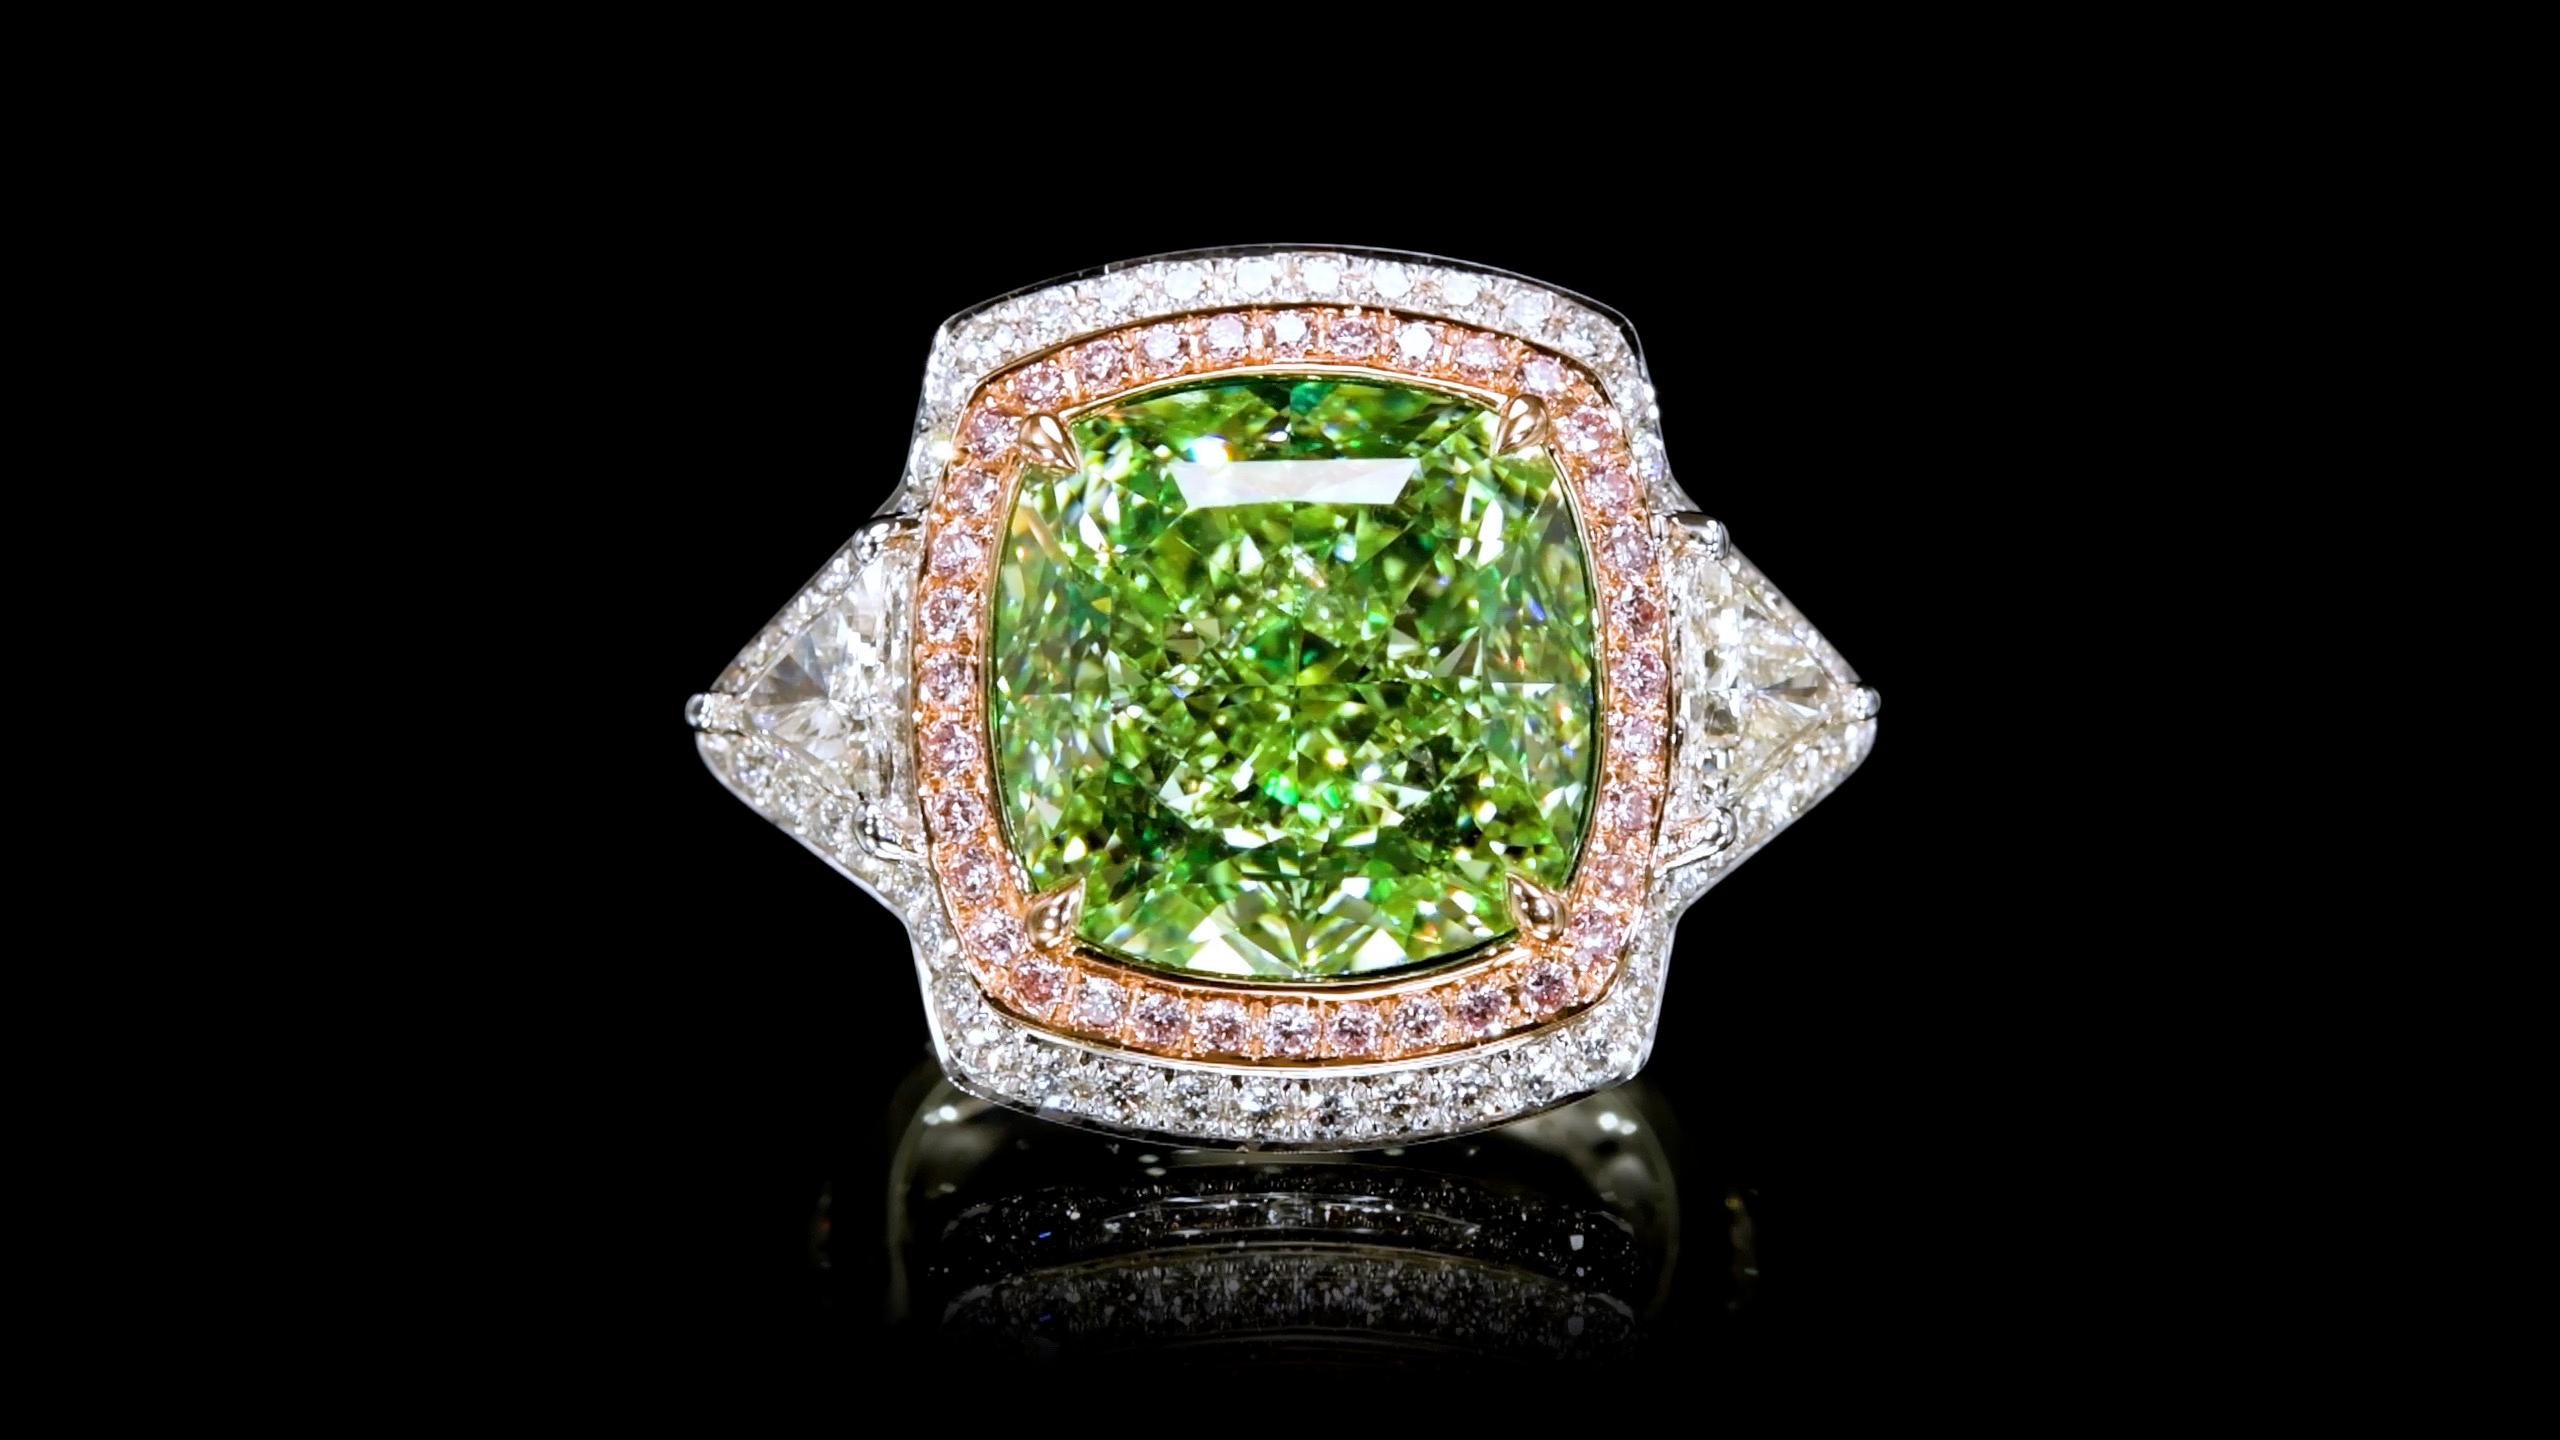 From Emilio Jewelry New York, a well known and respected dealer located on New York's iconic Fifth Avenue,

Our specialty are one of a kind jewels, and Natural Fancy Color diamonds are our favorite! 

The focal point of this magnificent ring is the